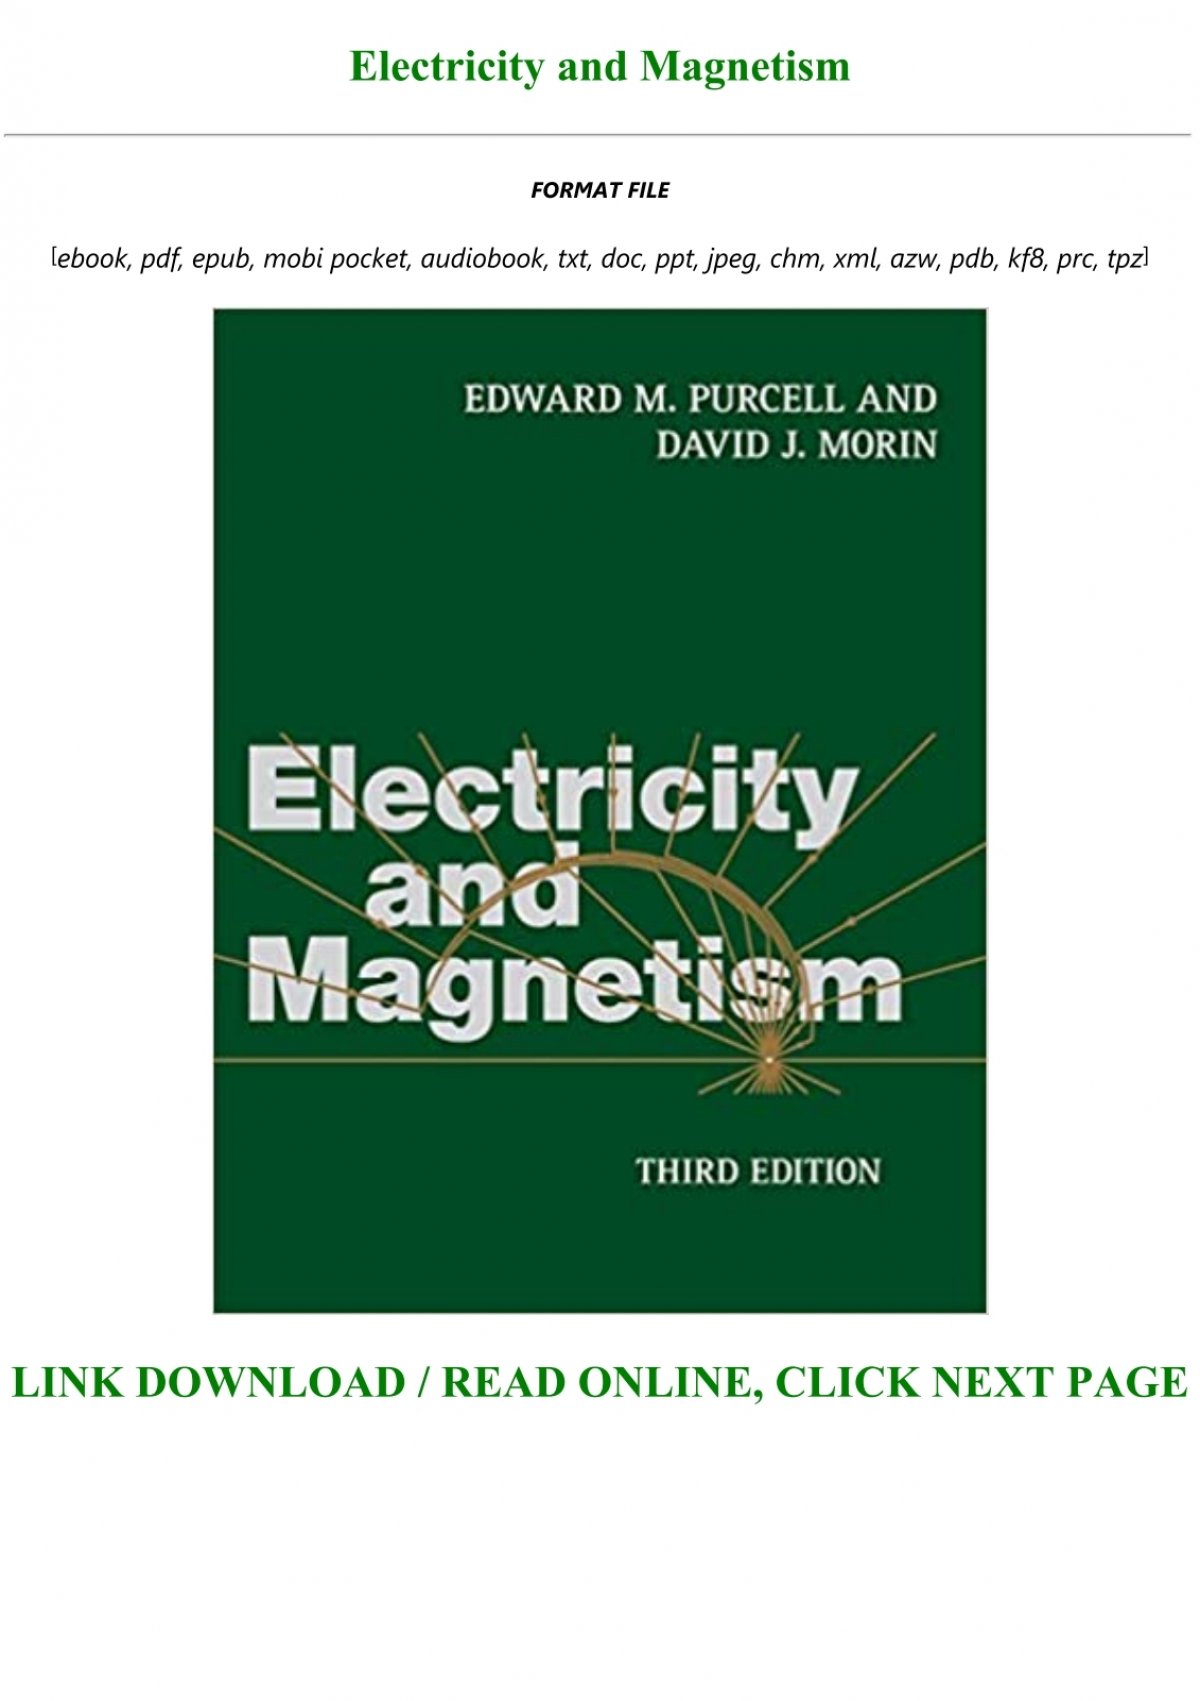 Electricity Magnetism